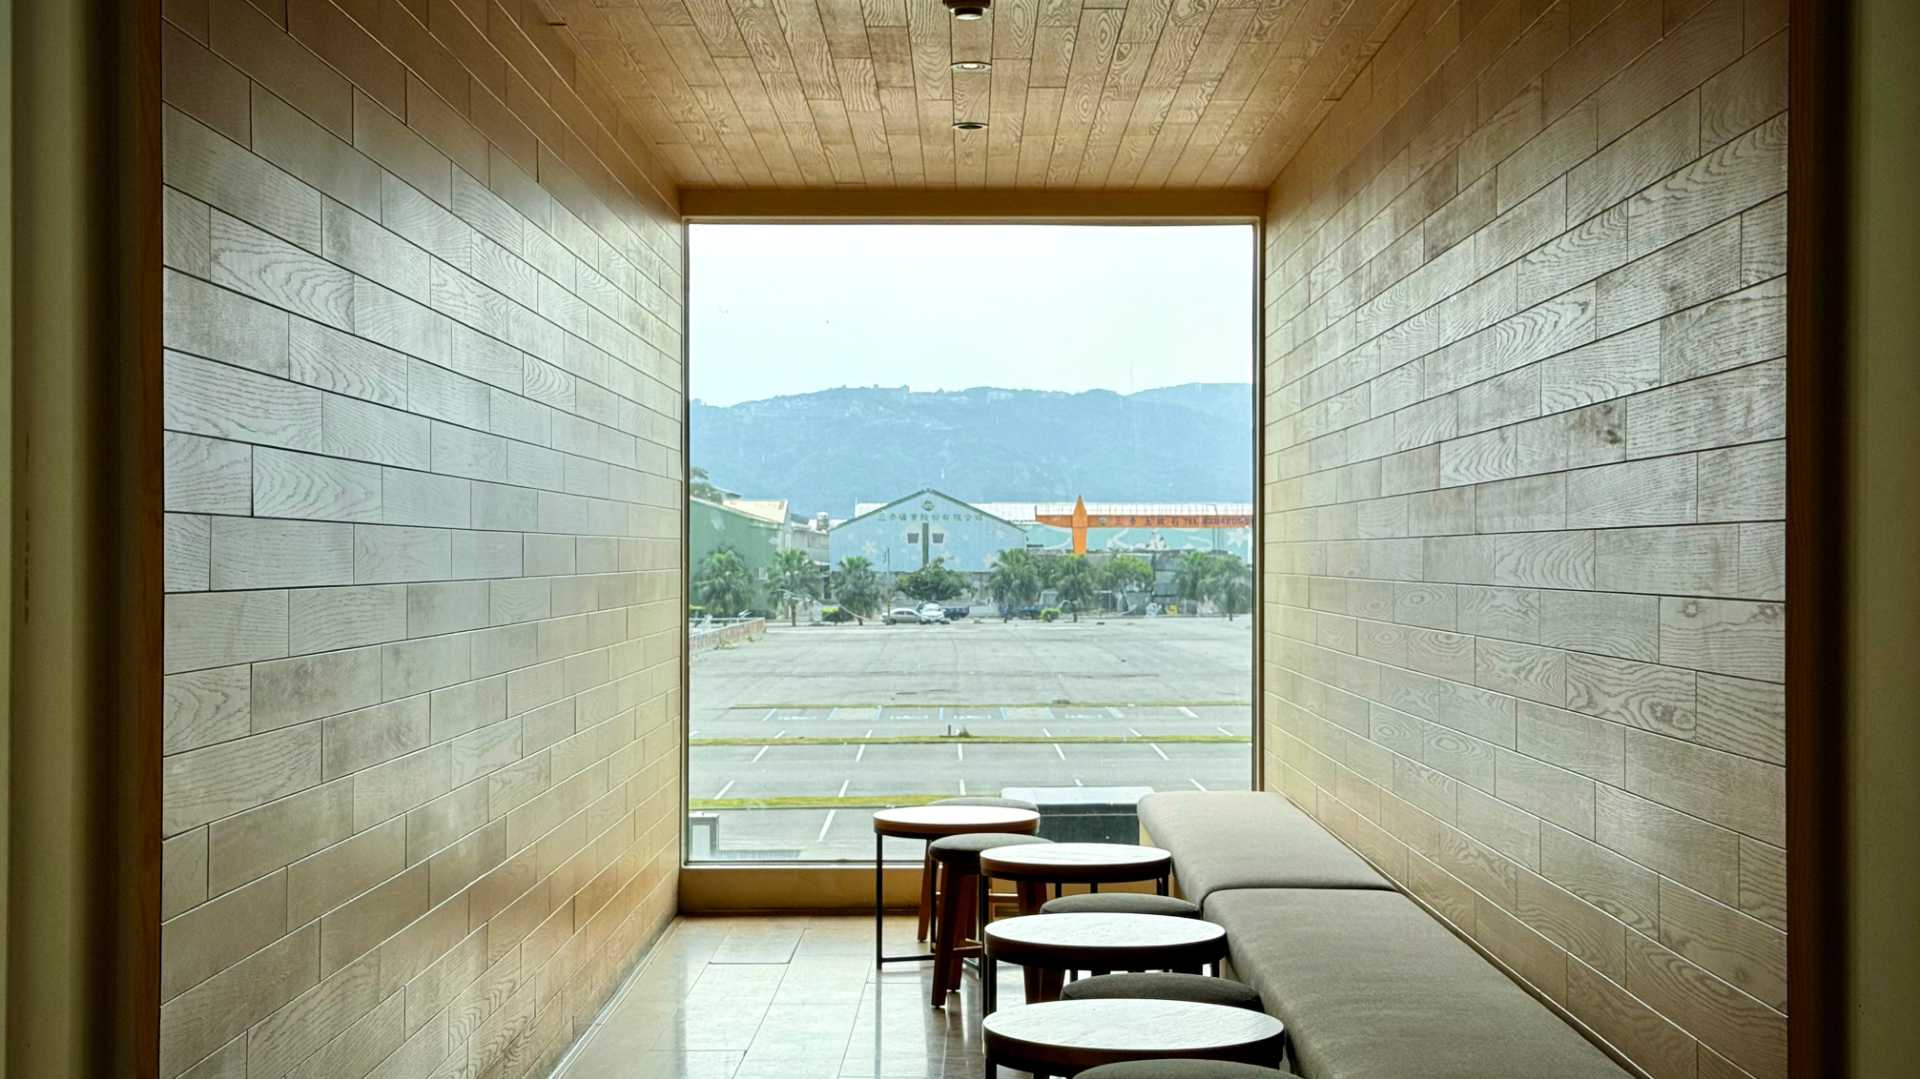 A large window looks out over a carpark at the end of one of the shipping containers. A bench seat and small round tables line the right wall.